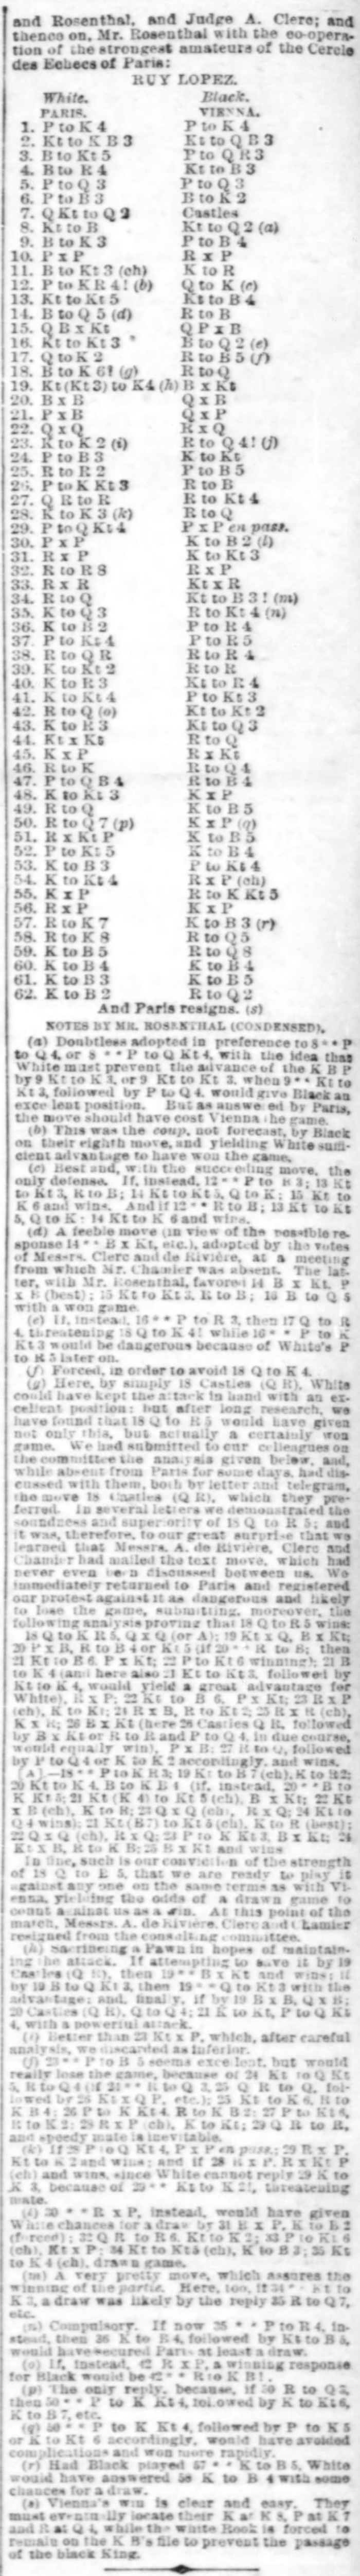 1885.12.20-02 New Orleans Times-Democrat.png